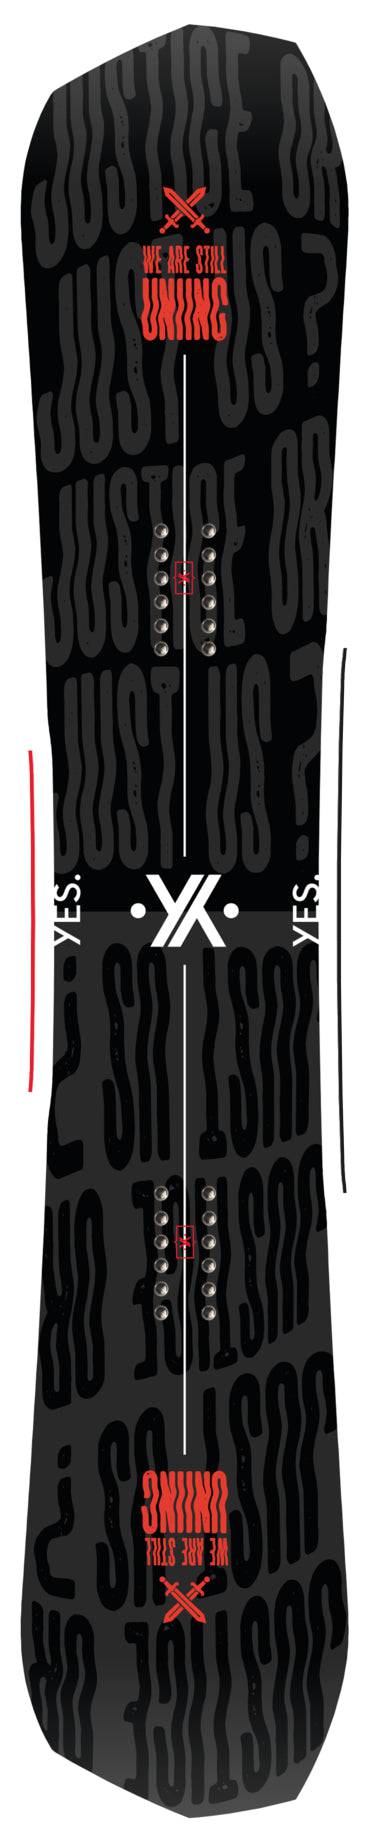 2021 Yes The Greats Uninc DEMO Snowboard